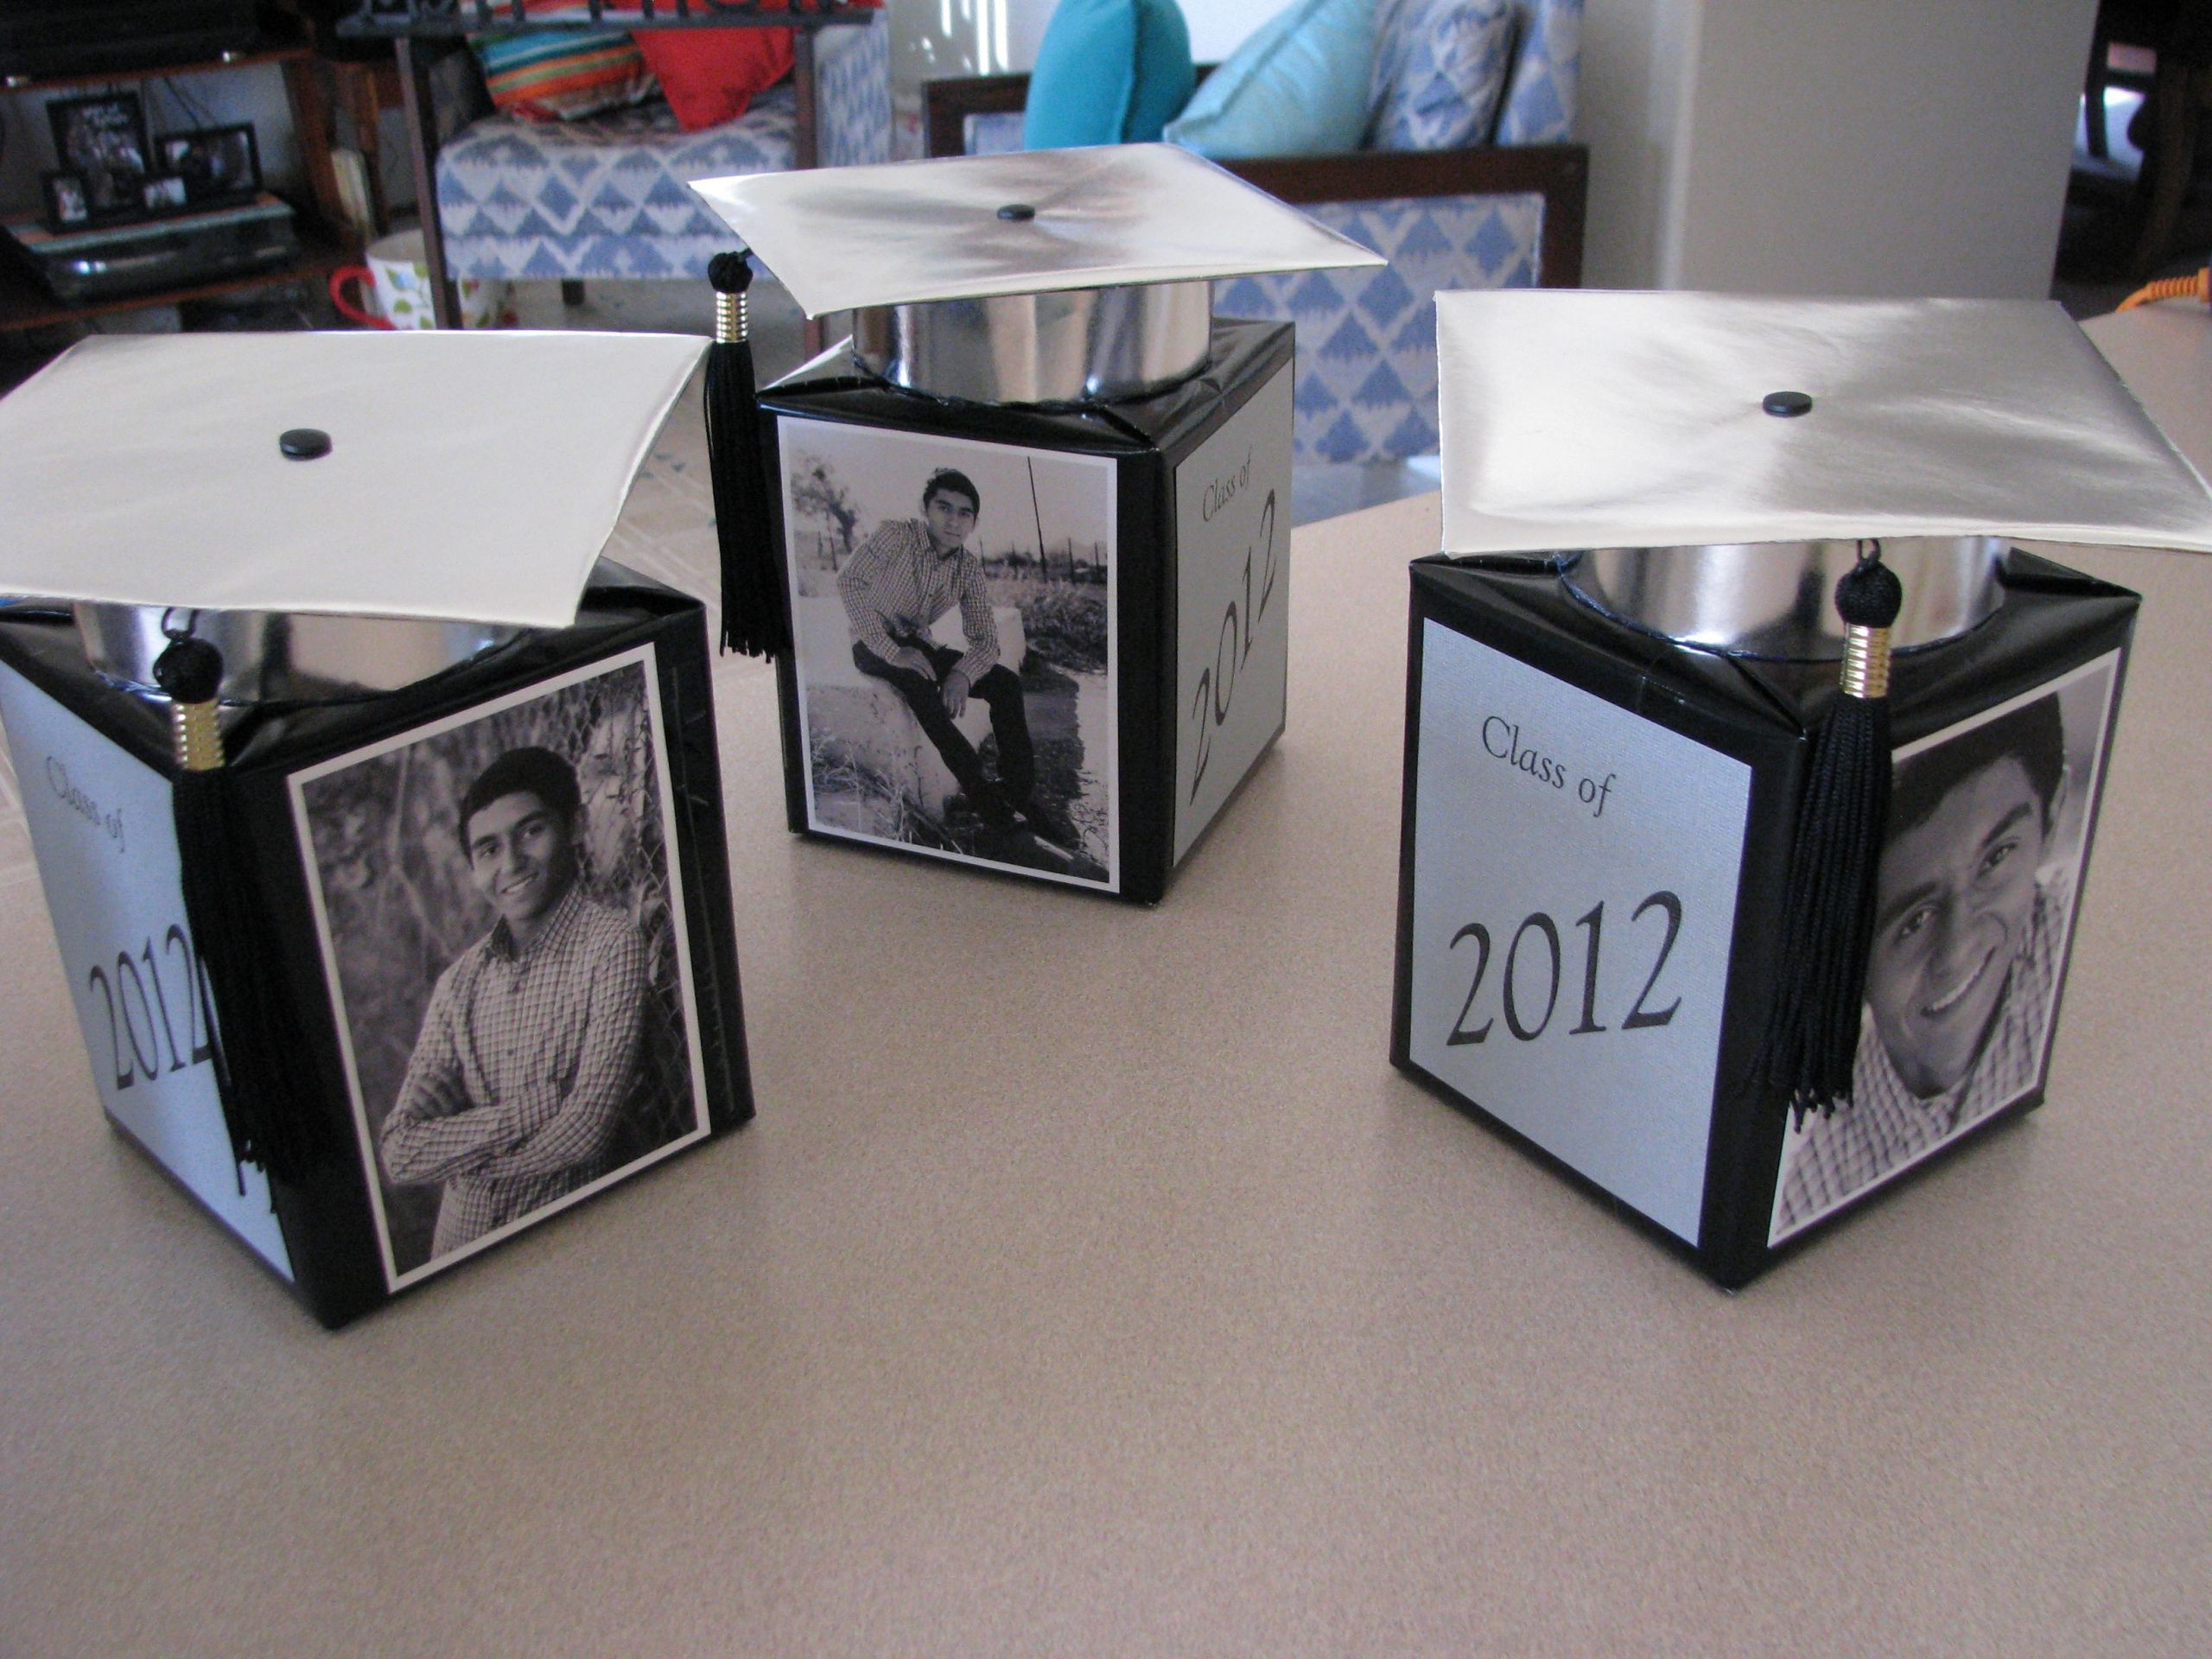 Personalized Graduation Party Ideas
 personalized grad party centerpieces out of tissue boxes